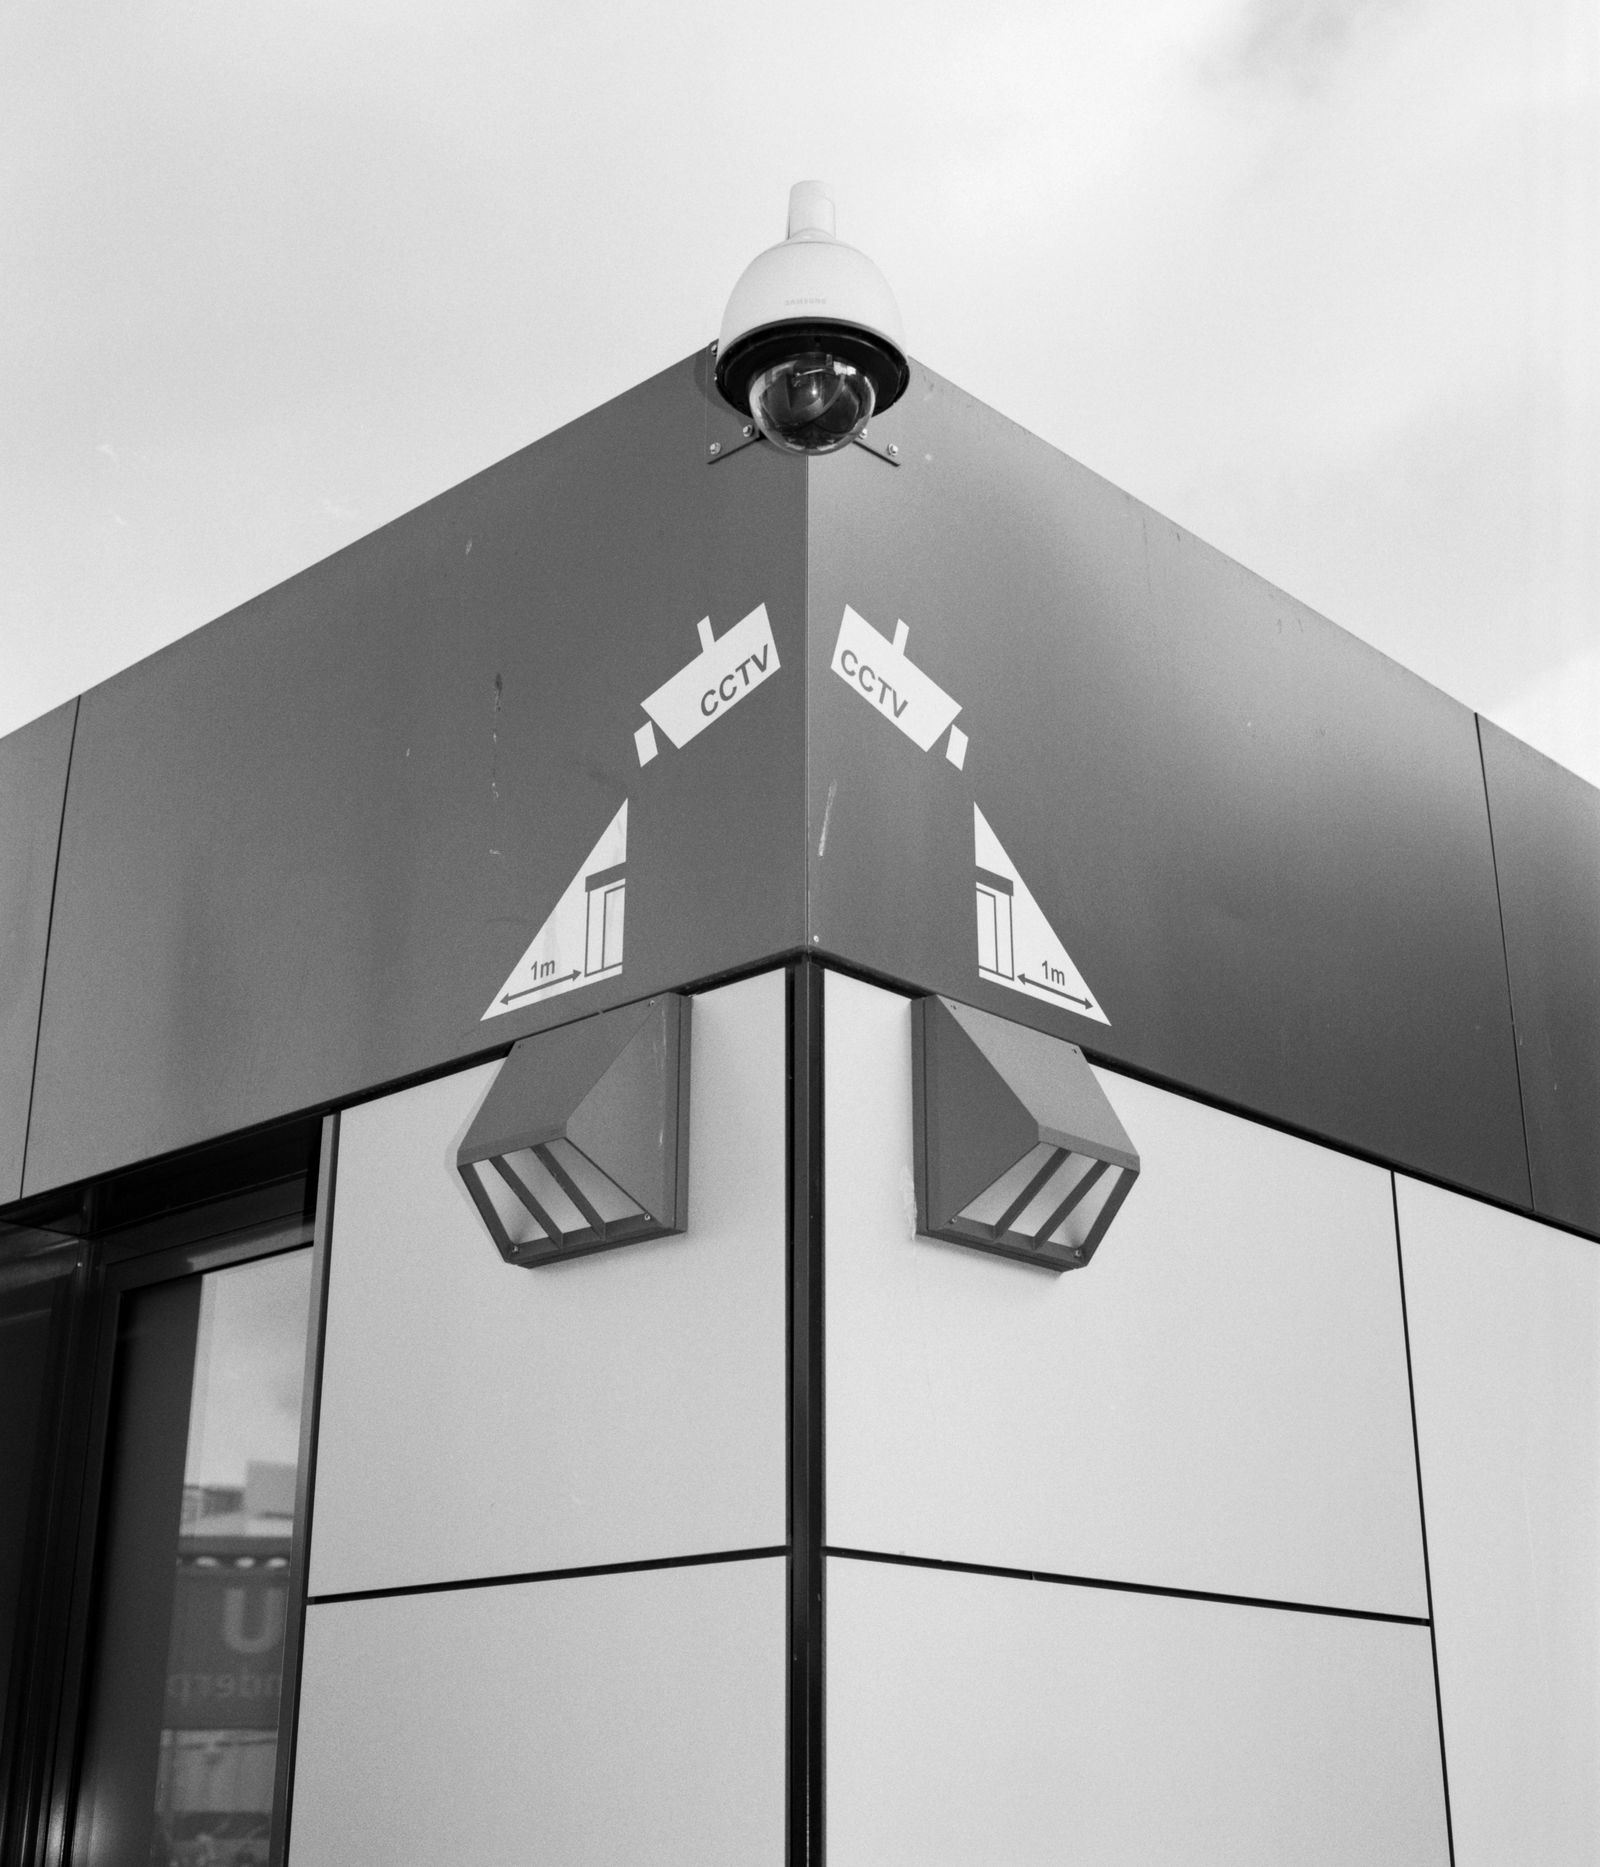 © Max Ferdinand Langer - Surveillance camera on the outside wall of a police station in Berlin